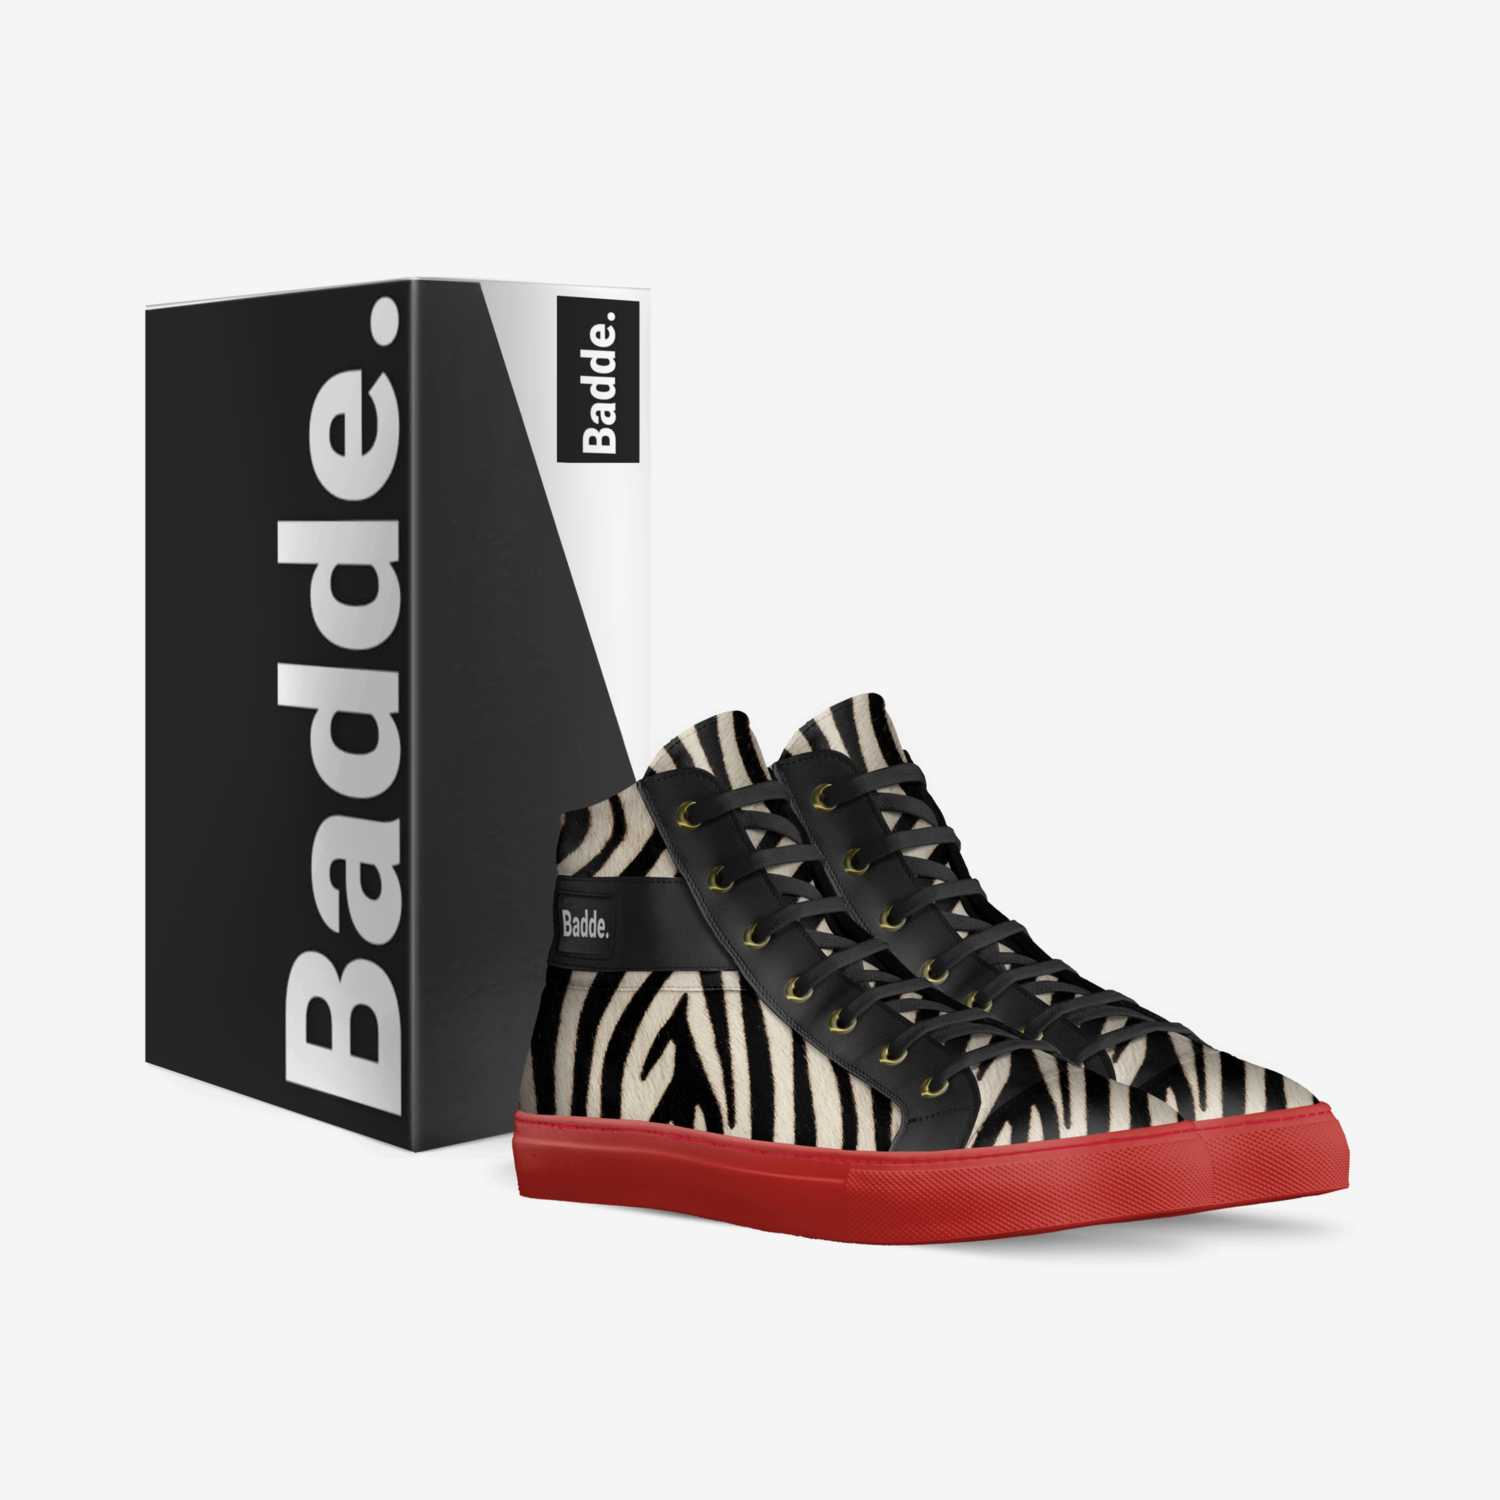 Badde.  custom made in Italy shoes by Ronnie Smith | Box view